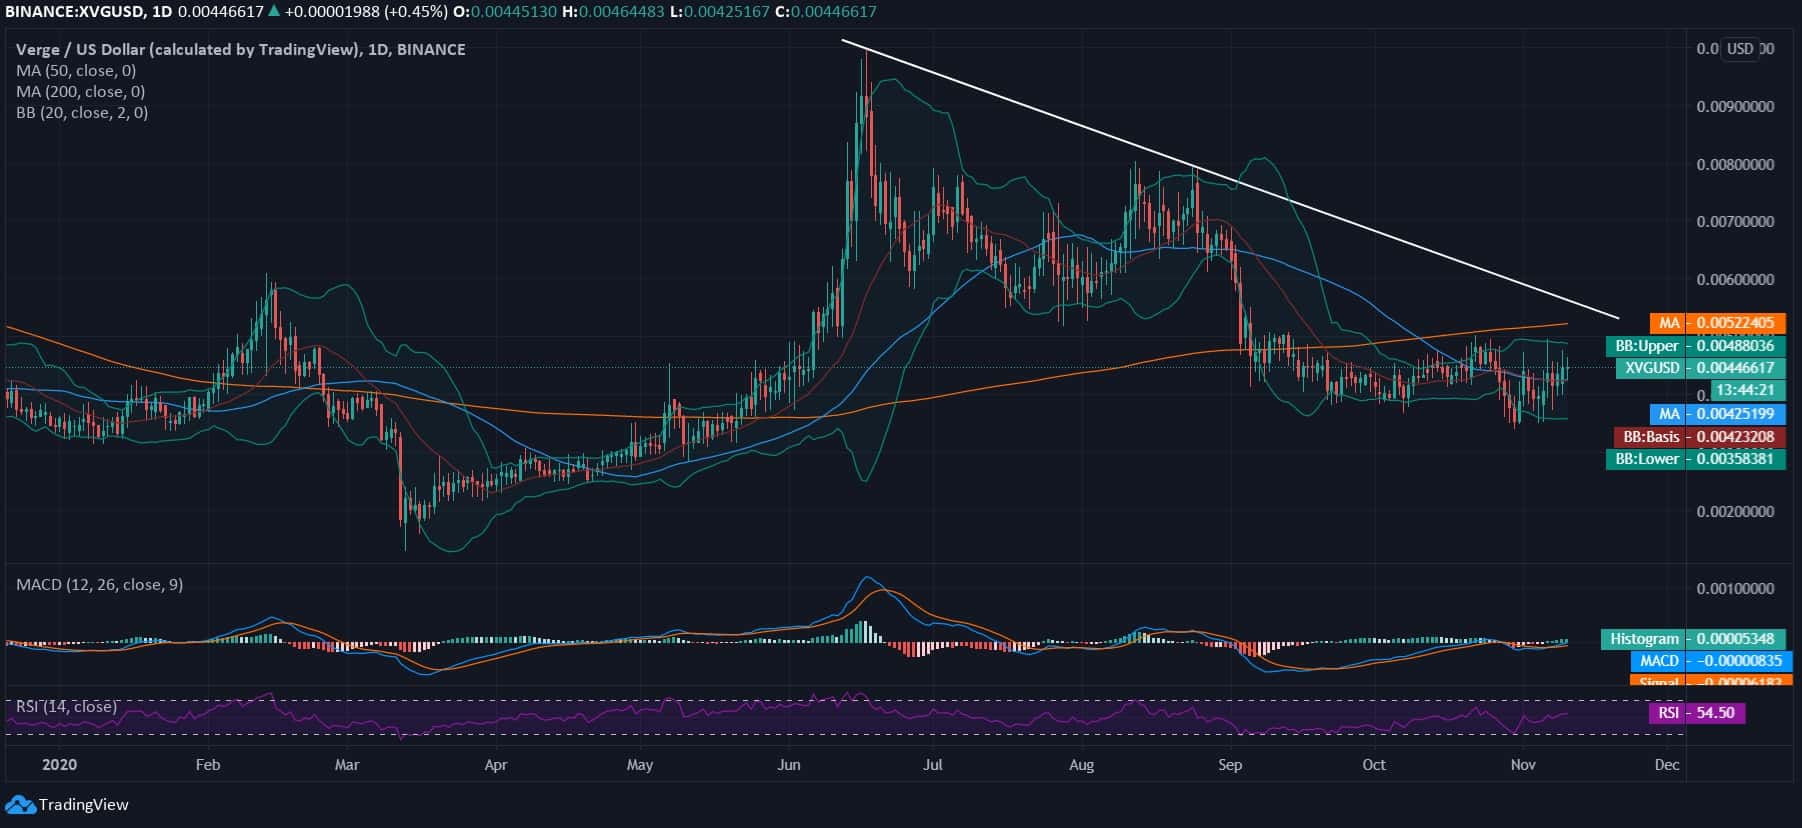 Verge (XVG) Confirms the Downtrend but Still Appears Bullish